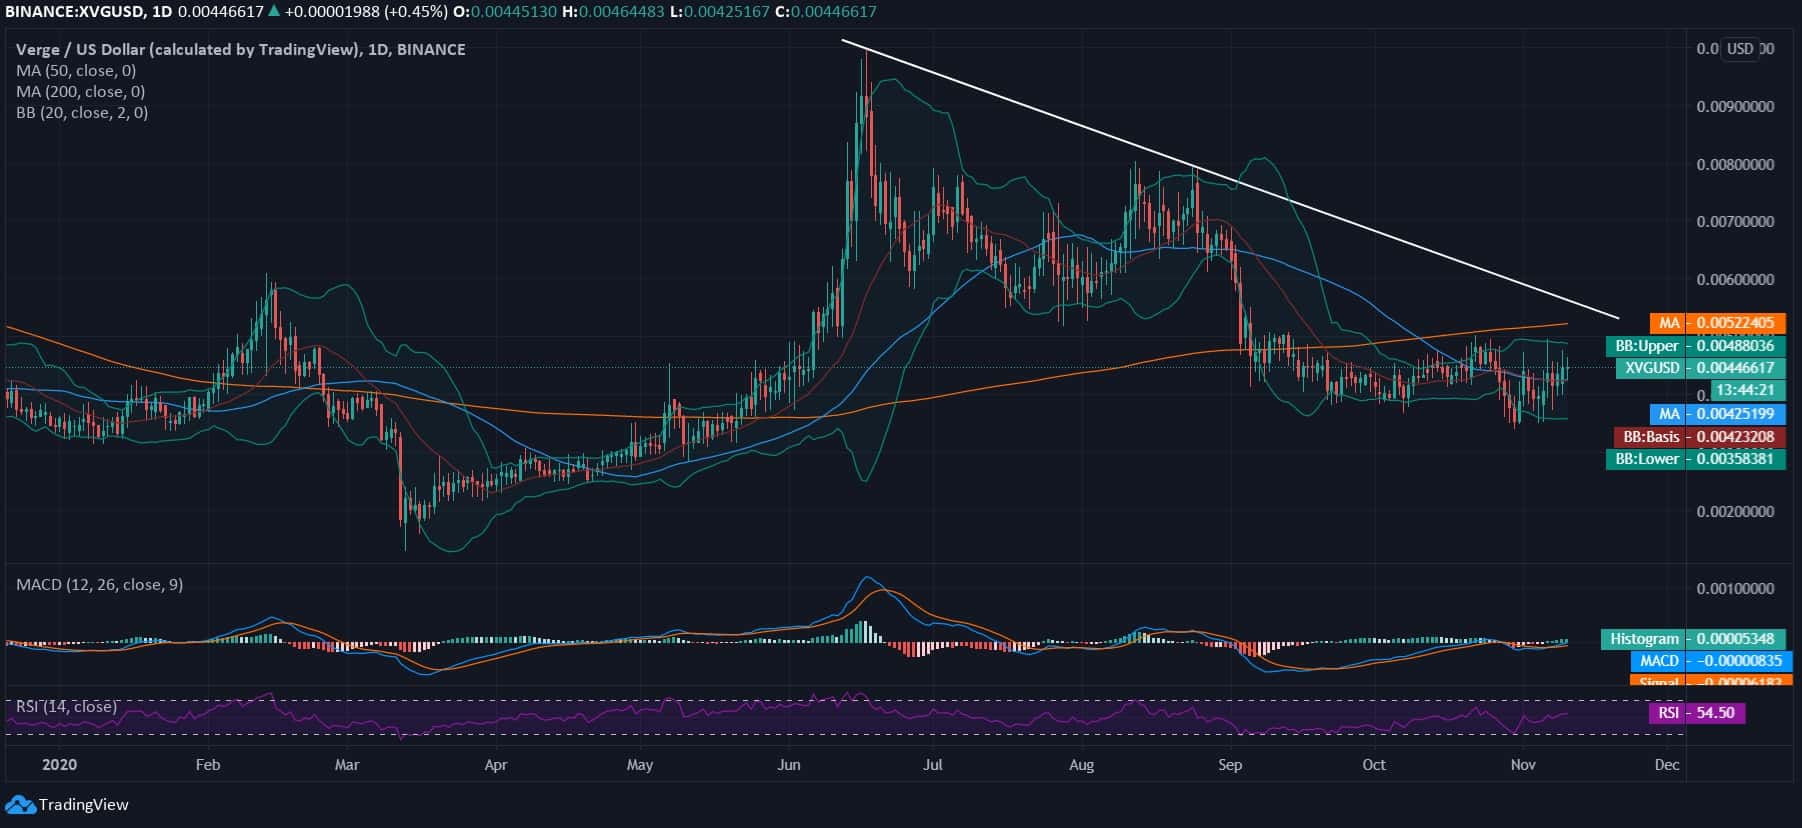 Verge (XVG) Confirms the Downtrend but Still Appears Bullish